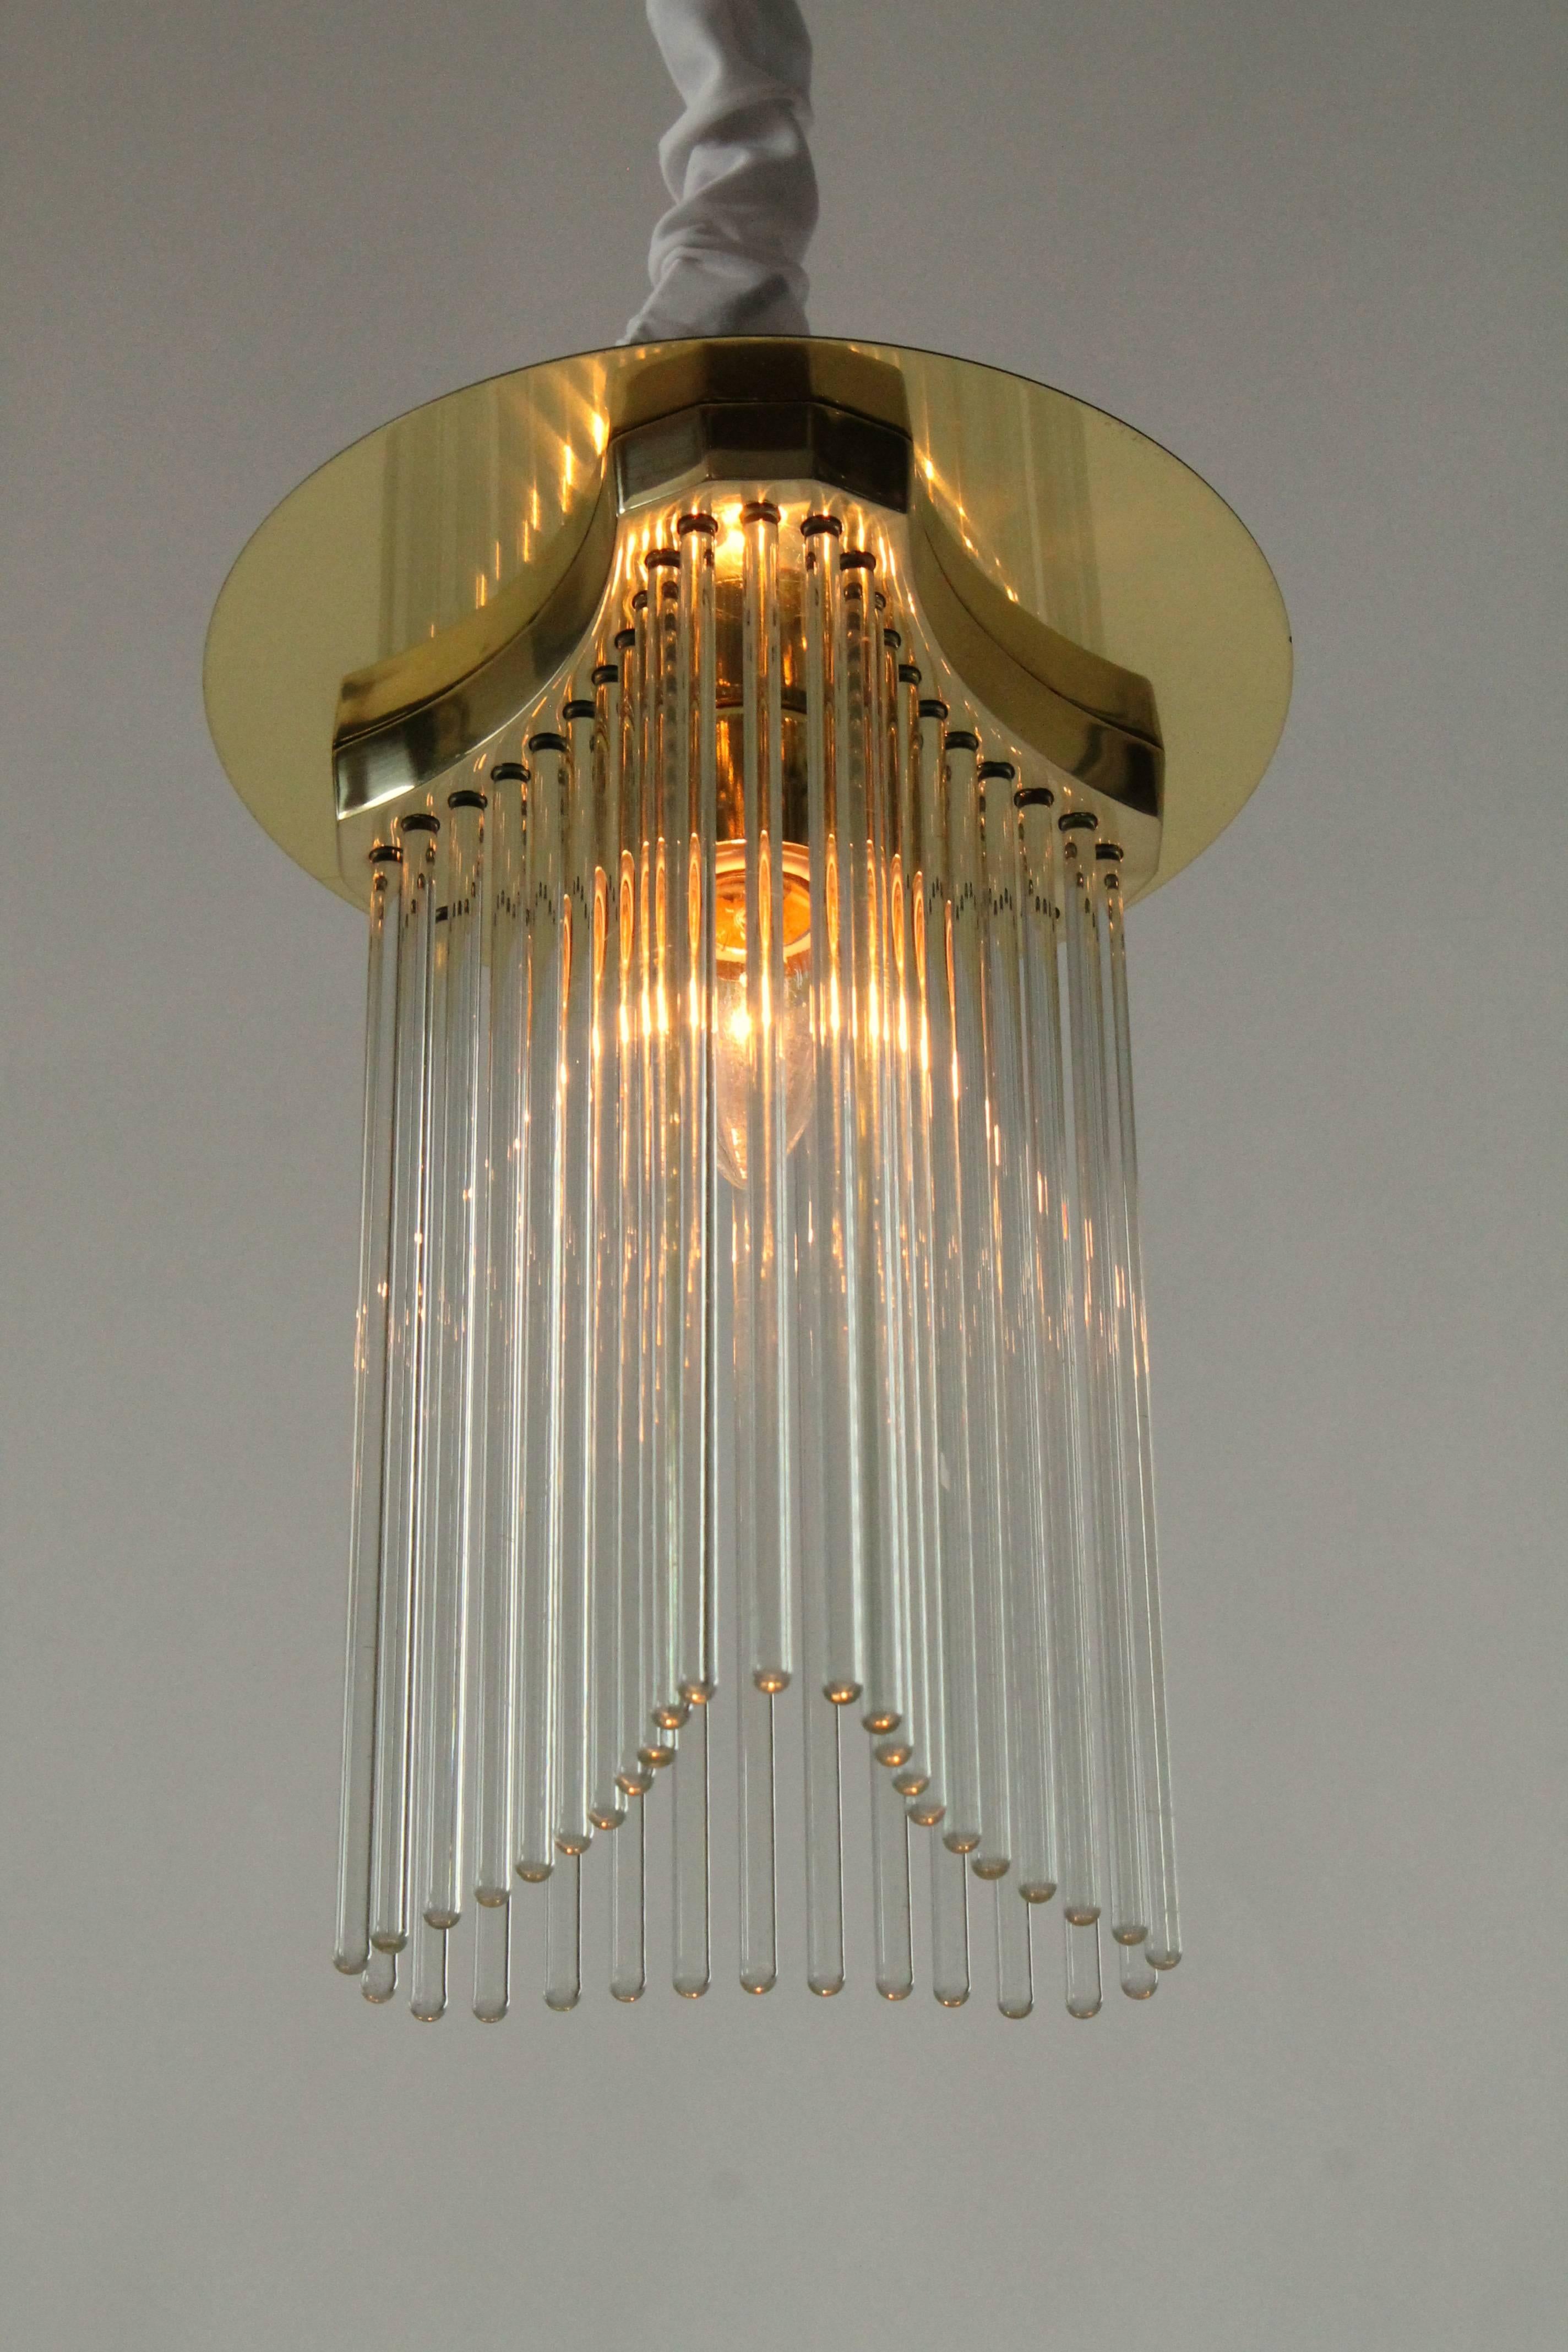 Flush mount with solid brass glass rod support and brass plated canopy   

Solid, sturdy construction.

Made with prime quality material and excellent craftmanship by Lightolier. 

One E26 socket rated at 60 watt. 

Measure inches 12 high.
  